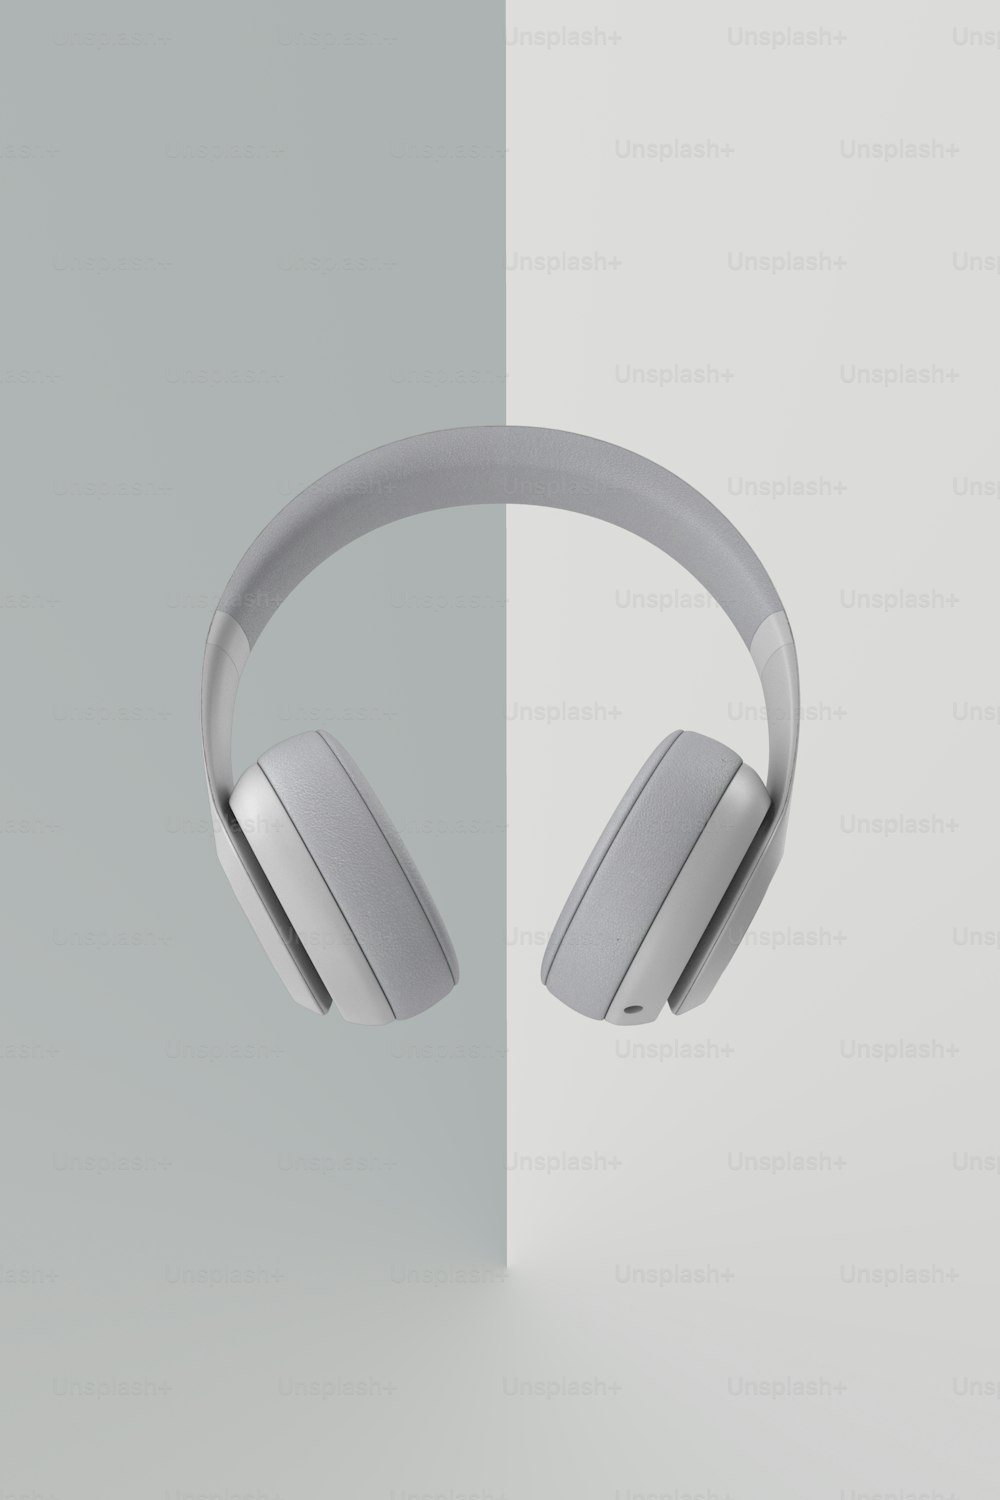 a pair of headphones sitting next to each other